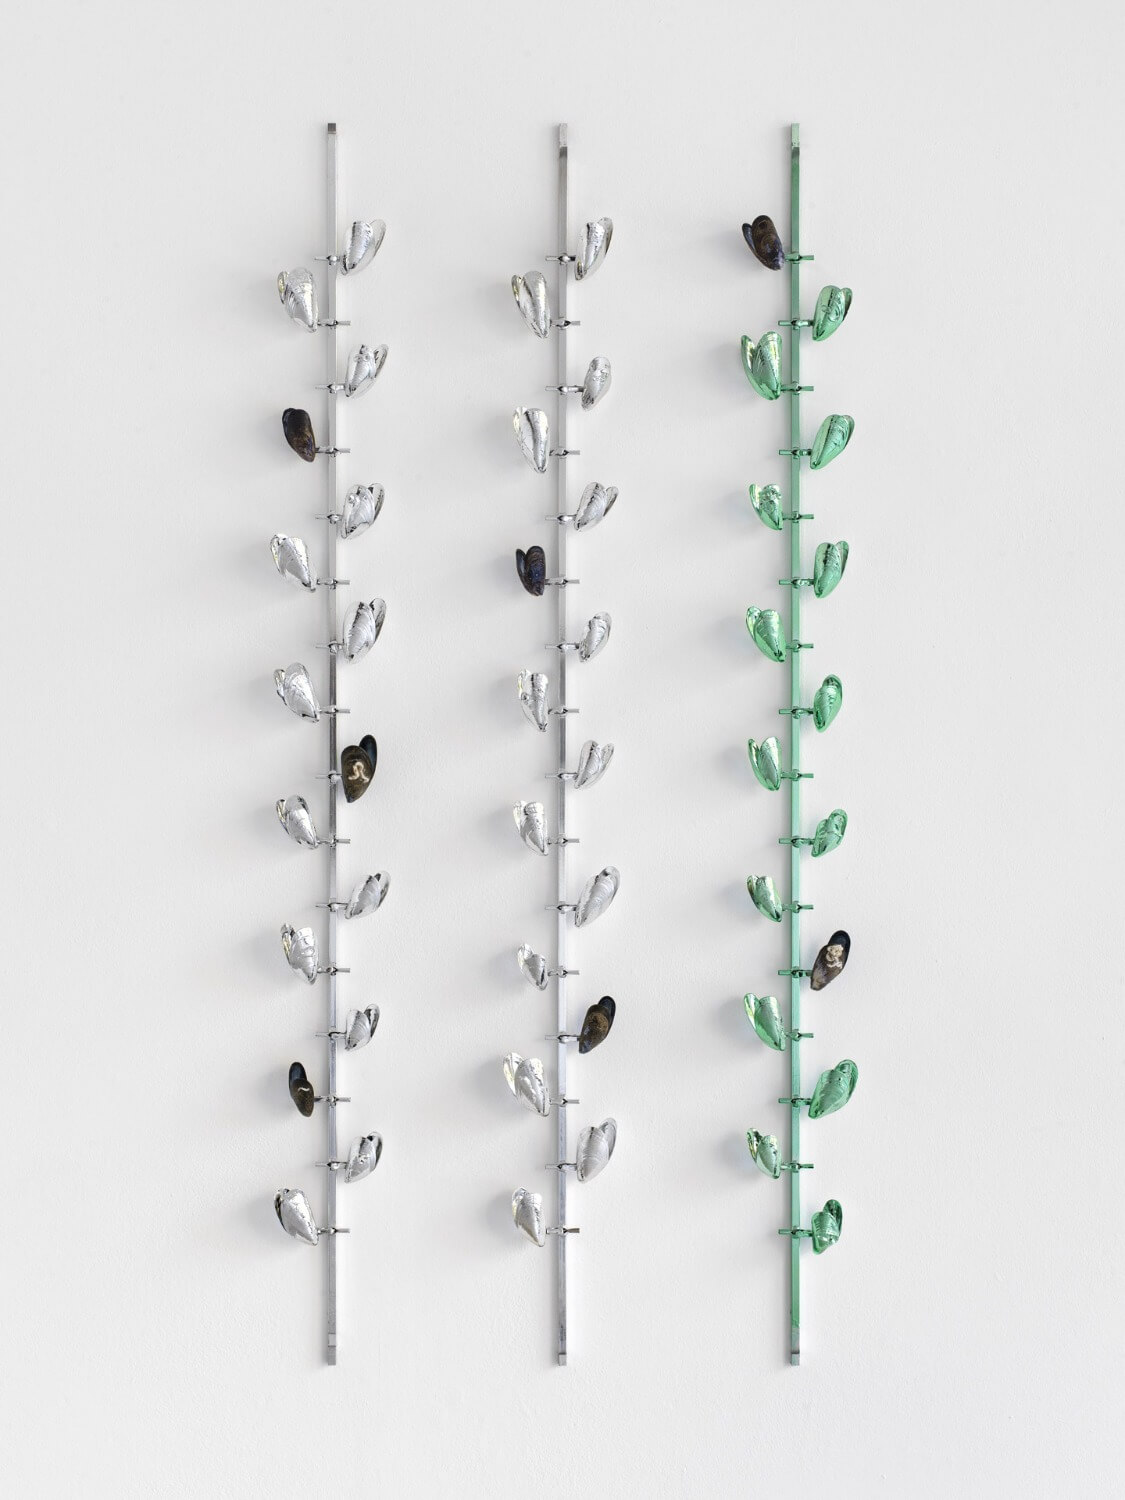 Linear Bivalves (Quintuple Green) (Detail), 2018 /
Vacuum-metallized and lacquered mussel shells on custom jigs / 484 × 260.3 × 7 cm /
Photo: Roman März